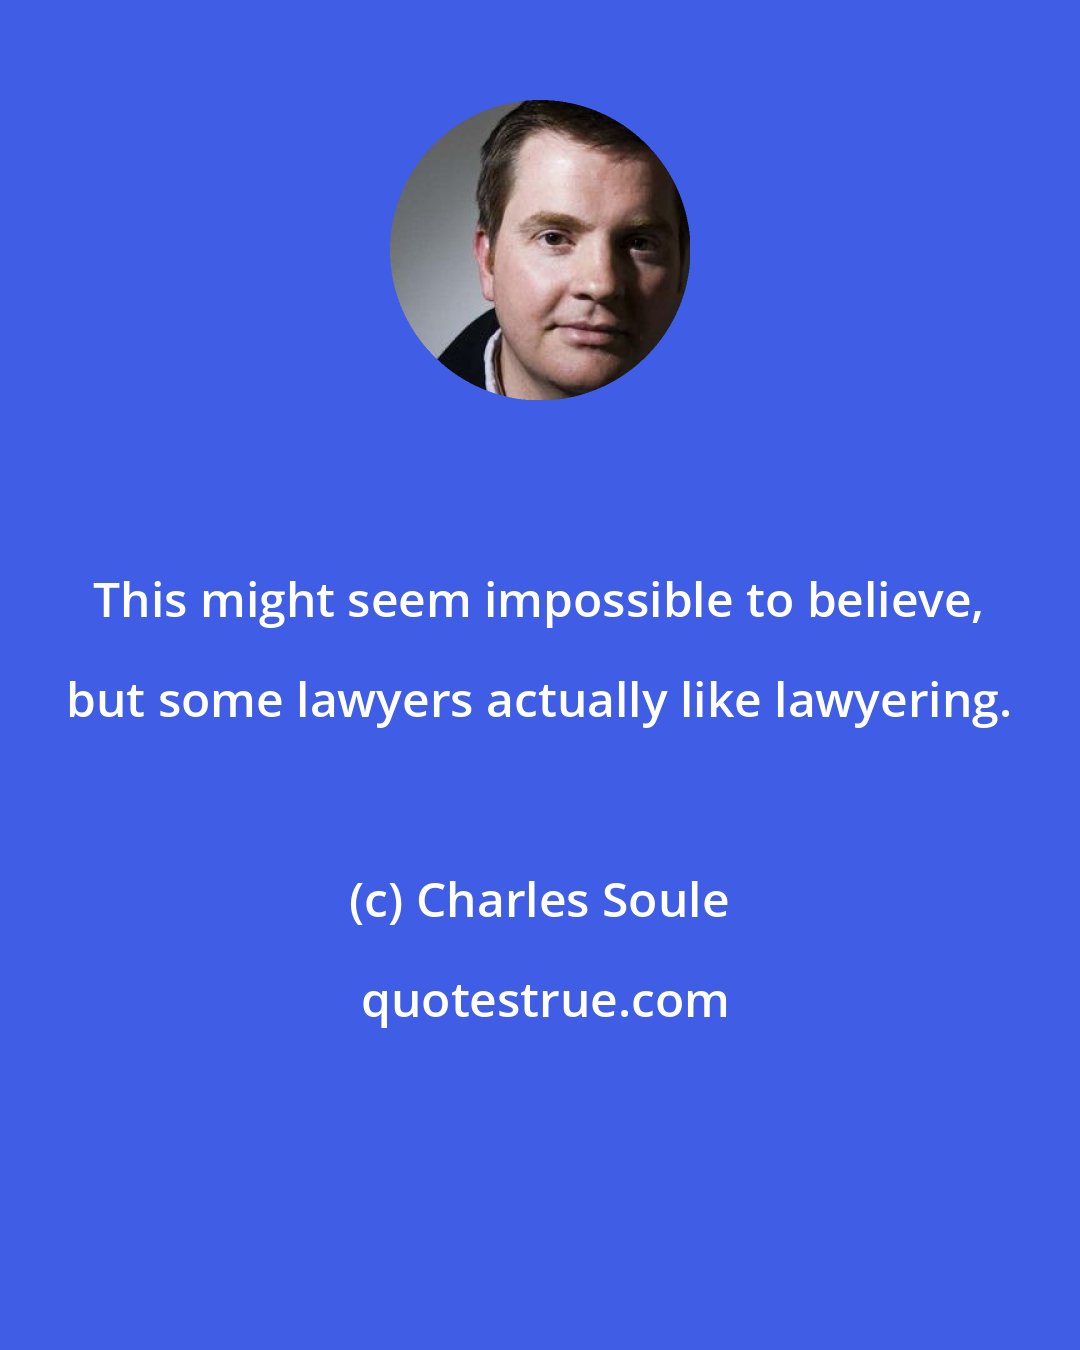 Charles Soule: This might seem impossible to believe, but some lawyers actually like lawyering.